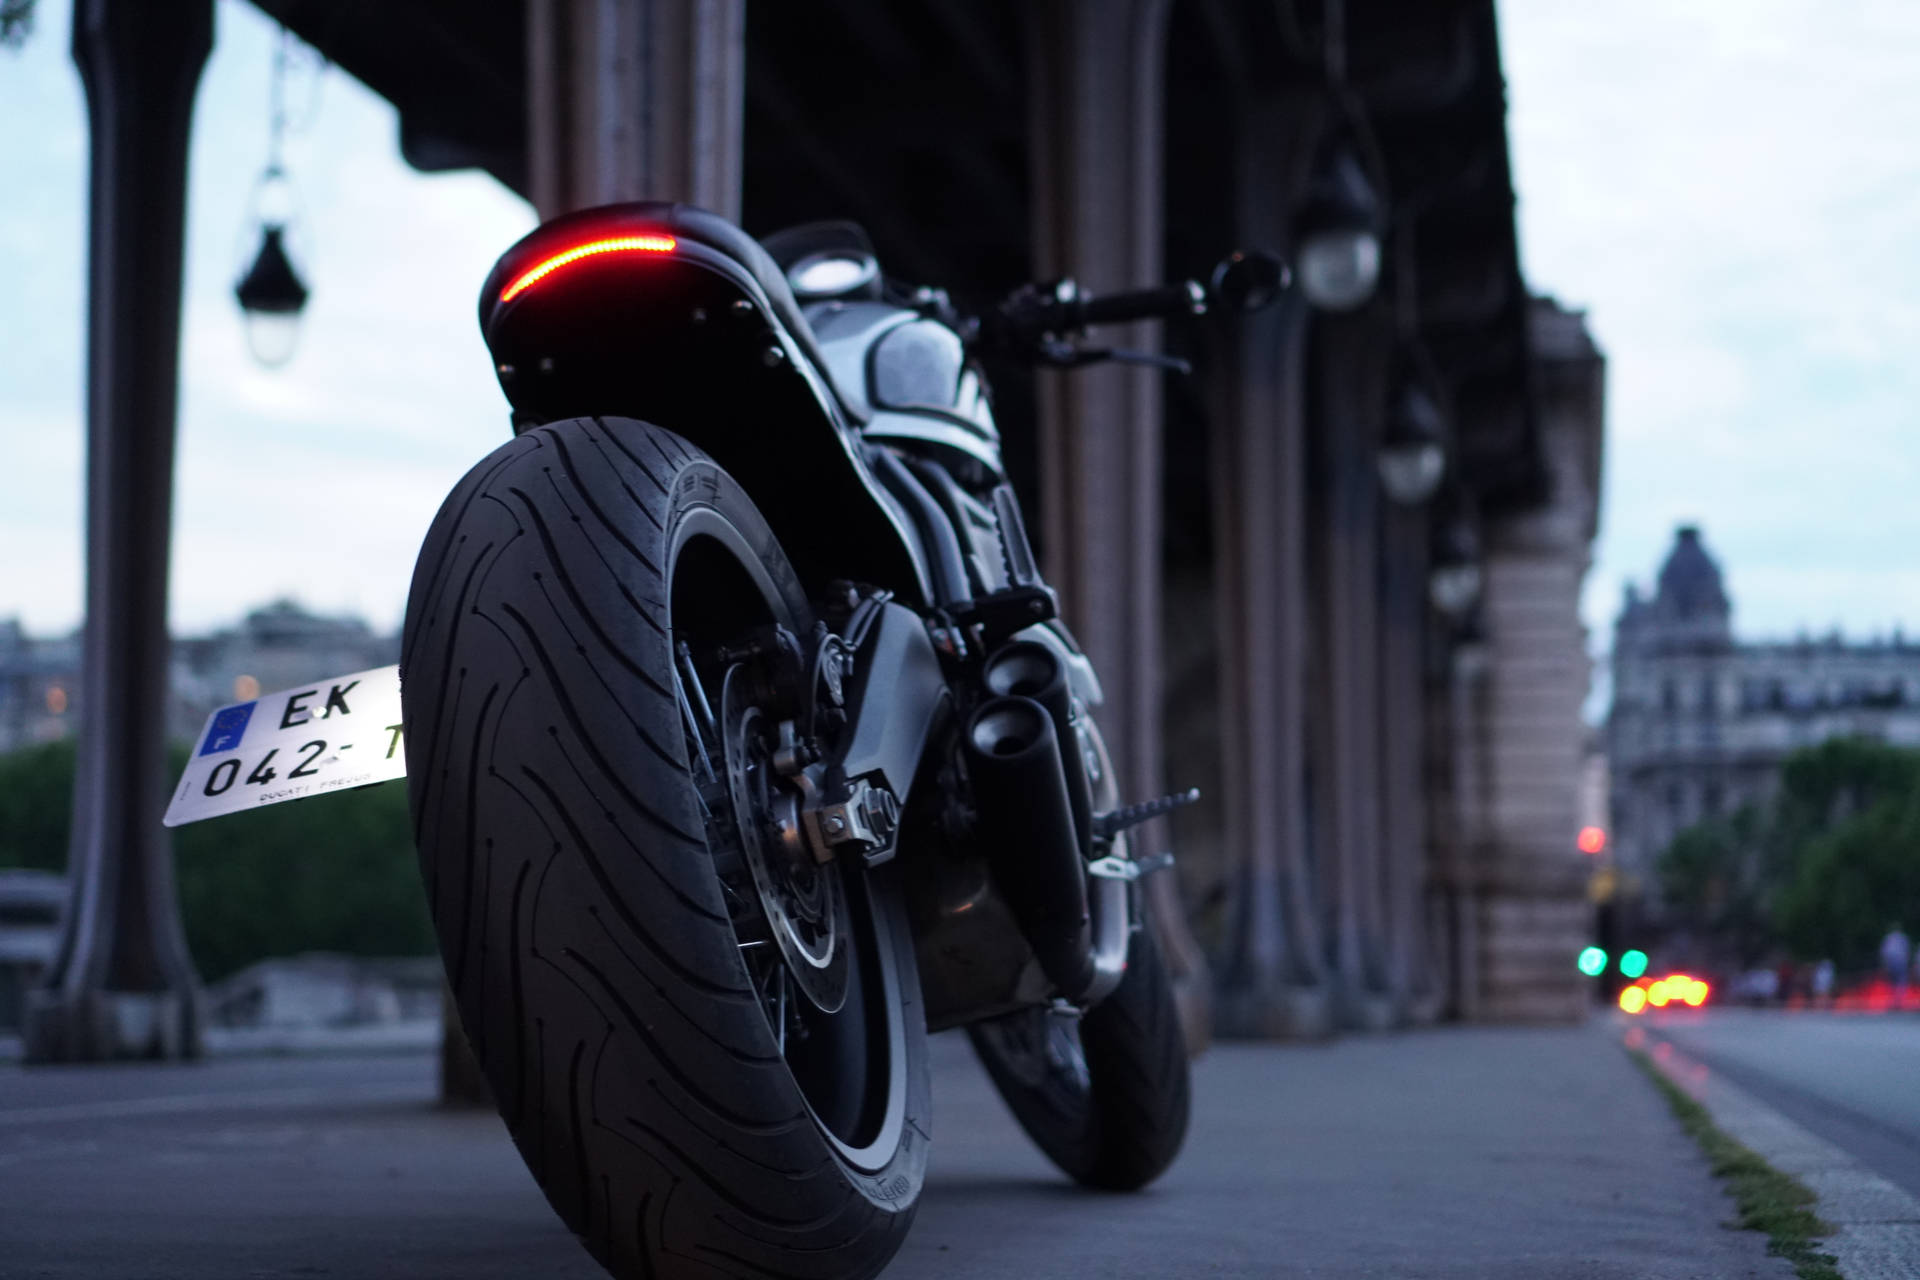 Showing Off Its Power And Beauty, This Black Ducati Turns Heads In The City. Background